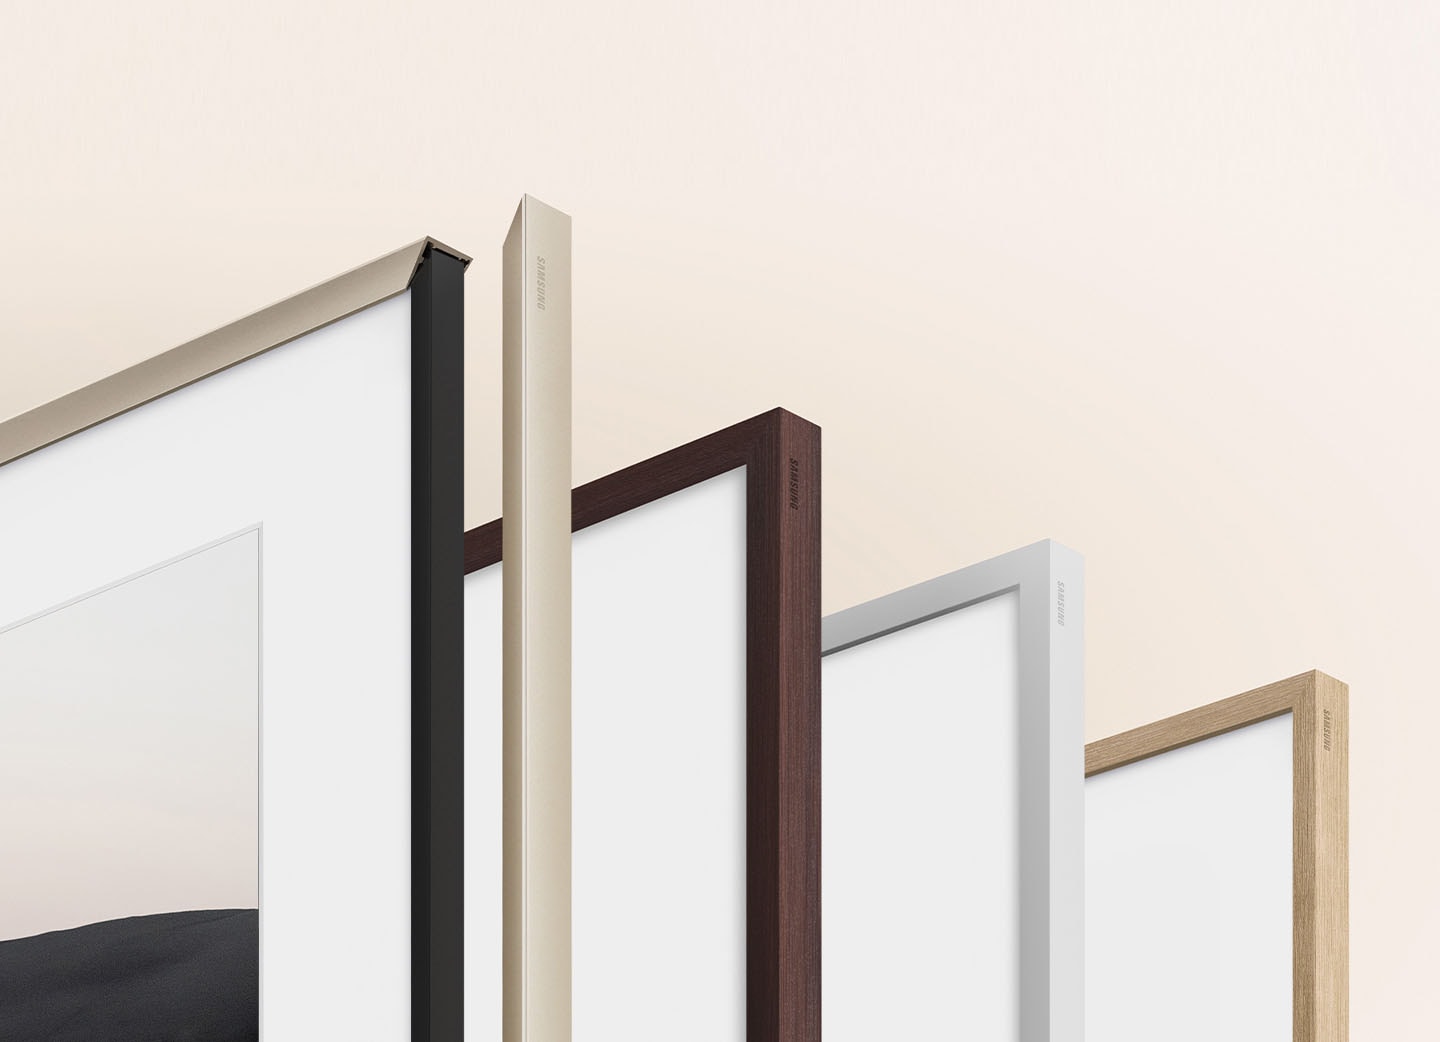 A variety of The Frame's customizable bezels are displayed.